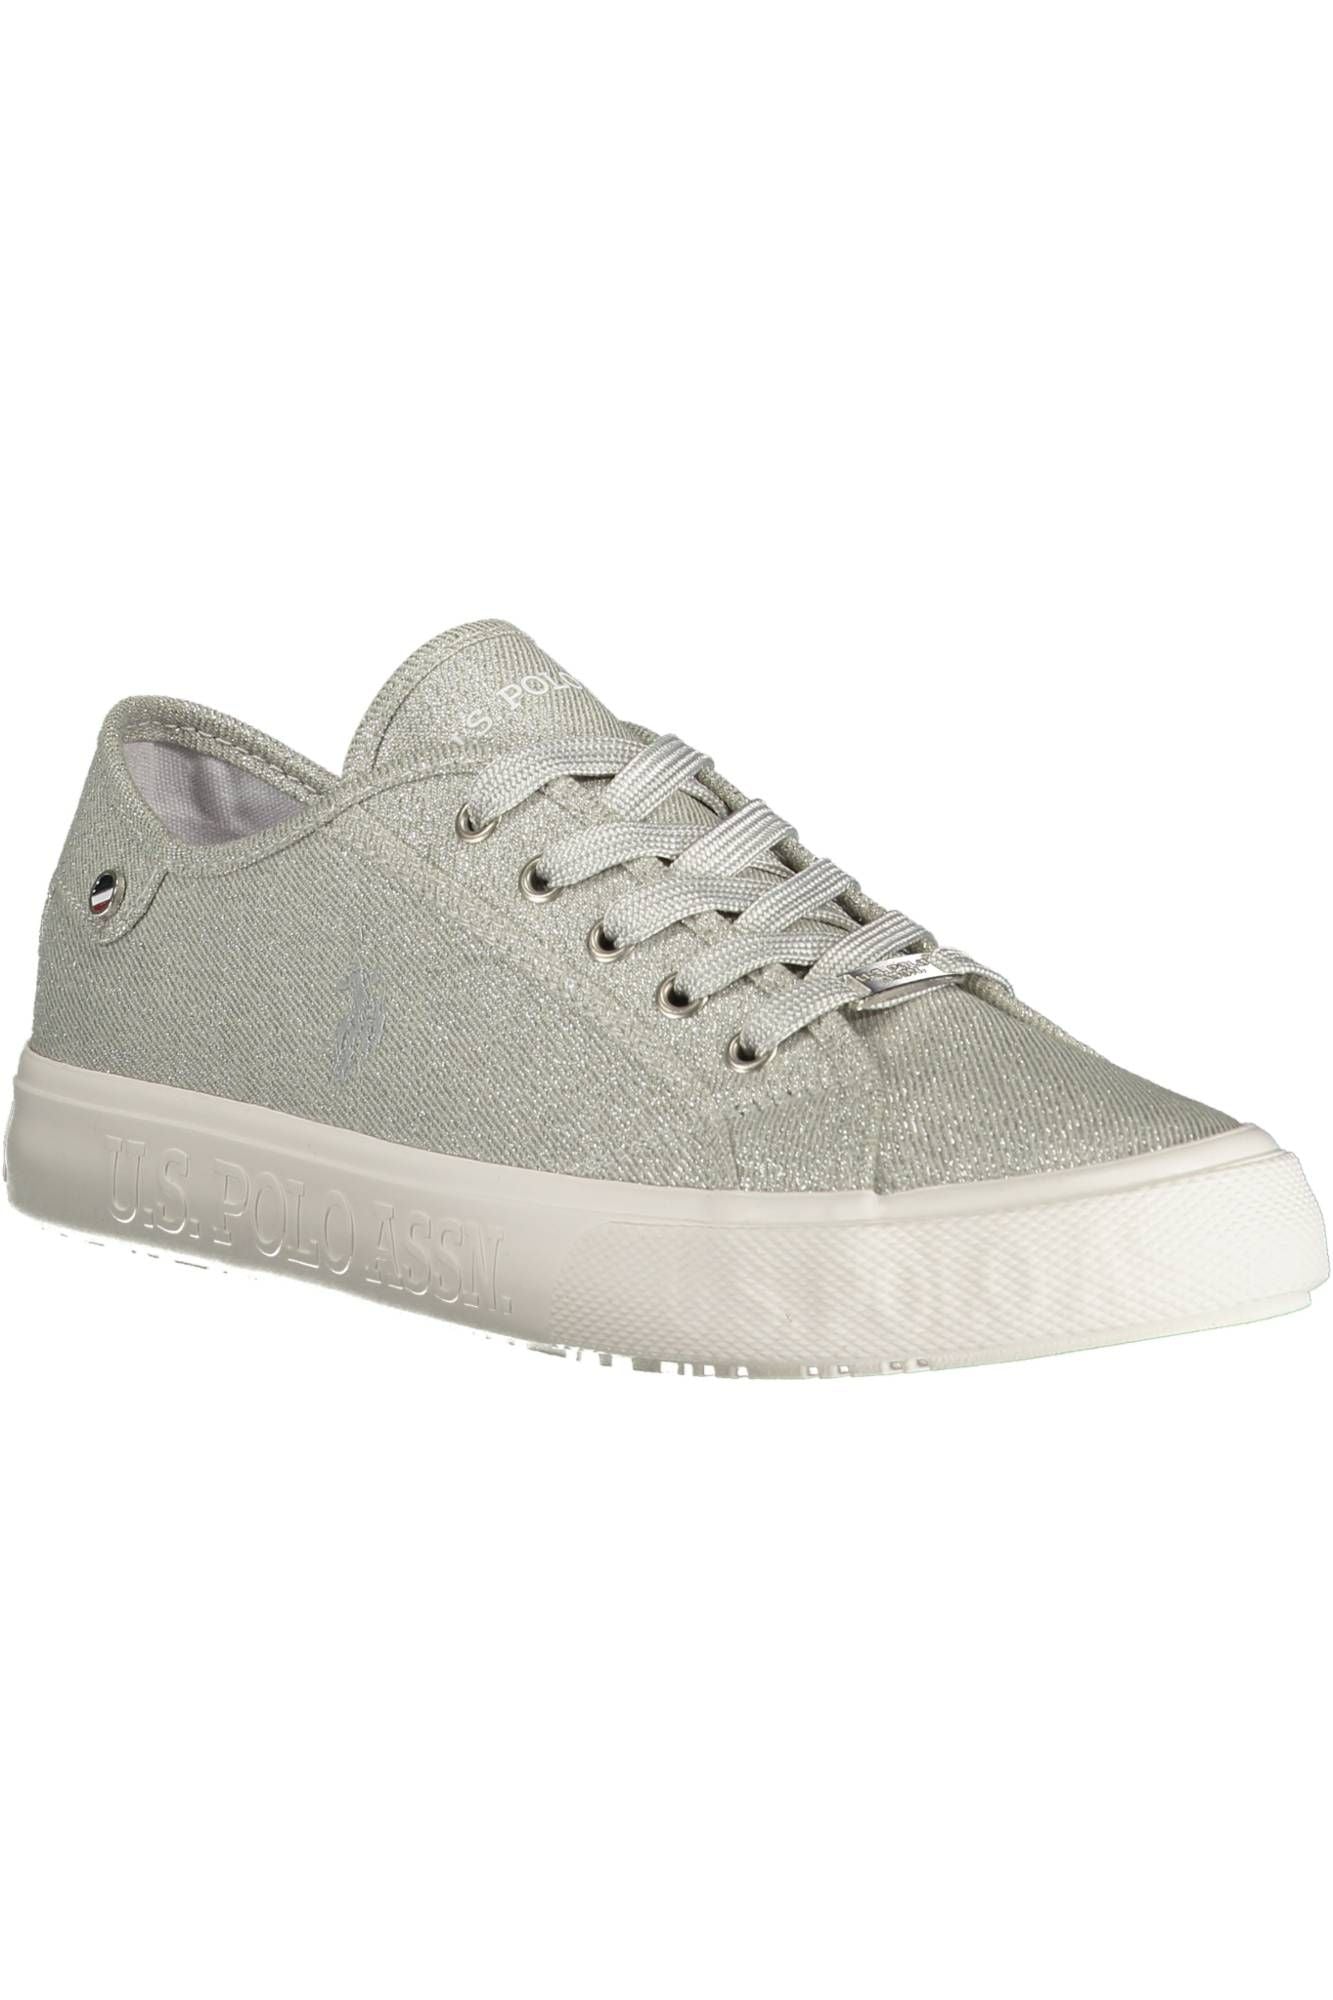 Silver Lace-up Sporty Sneakers for Modern Women